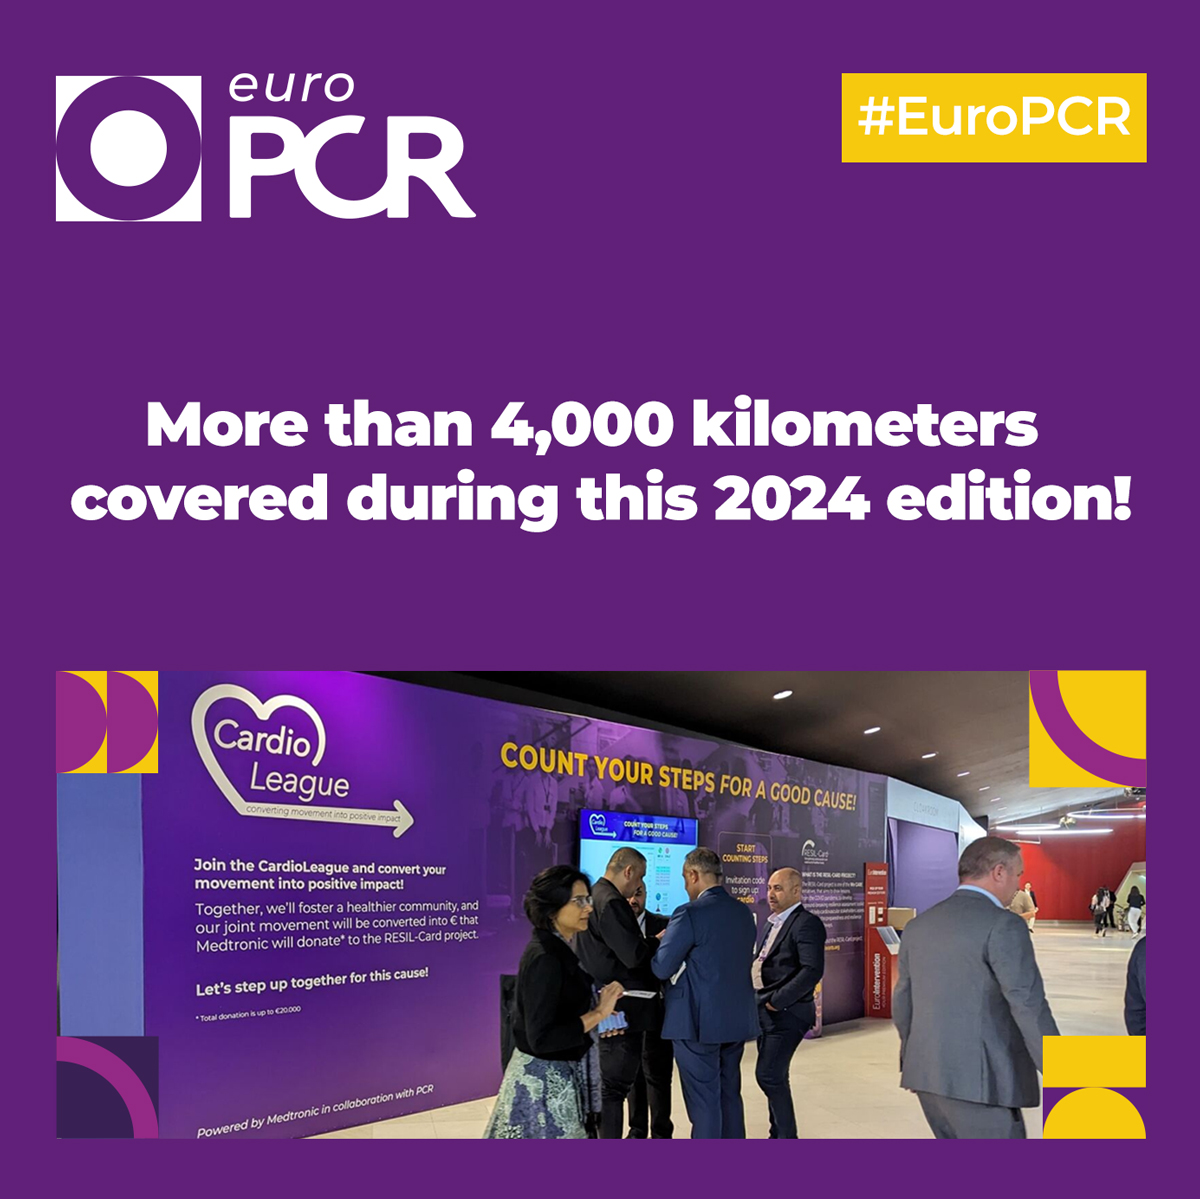 Did you know? During #EuroPCR participants have collectively covered more than 4,000 kilometers — the equivalent to nearly 12,000 climbs up the Eiffel Tower 👣 in the CardioLeague challenge! 👏Huge thanks to all who helped to increase Medtronic’s donation for the RESIL-Card